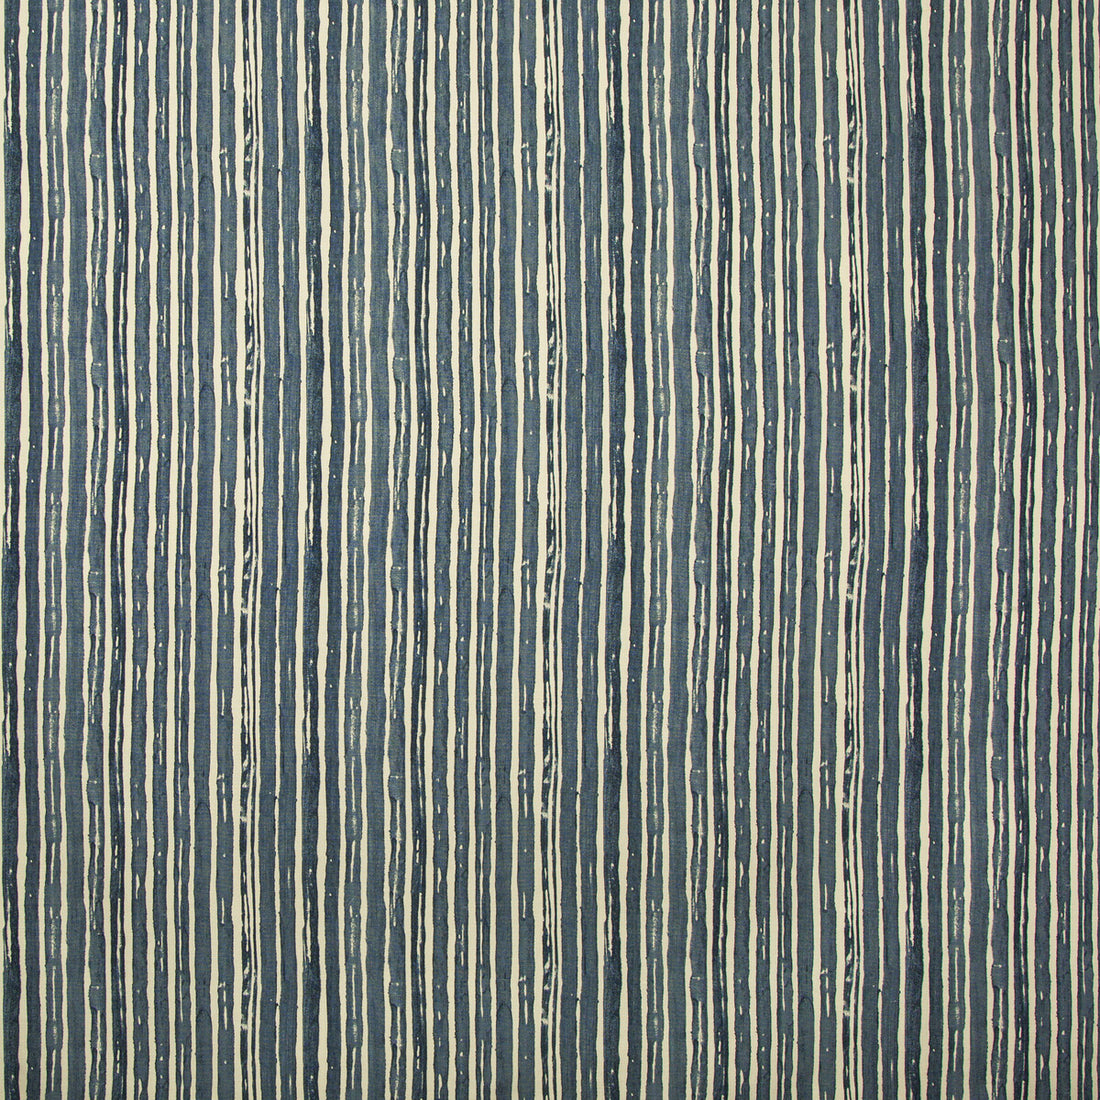 Benson Stripe fabric in ink color - pattern 2019151.50.0 - by Lee Jofa in the Carrier And Company collection